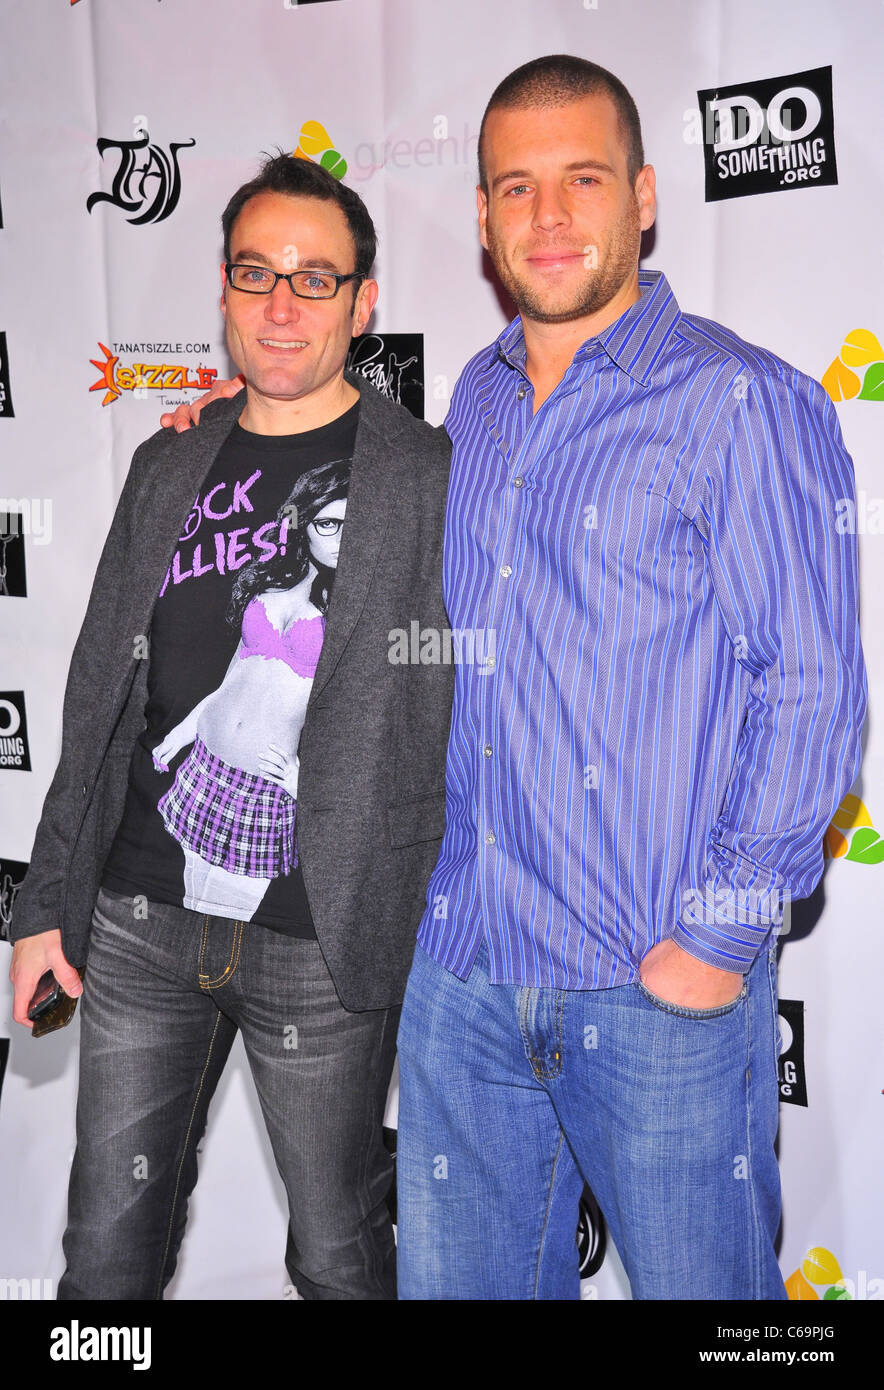 David Yontef, Jason Teich at arrivals for Vinny Guadagnino Launches IHAV Apparel Line, Greenhouse, New York, NY January 3, 2011. Photo By: Gregorio T. Binuya/Everett Collection Stock Photo